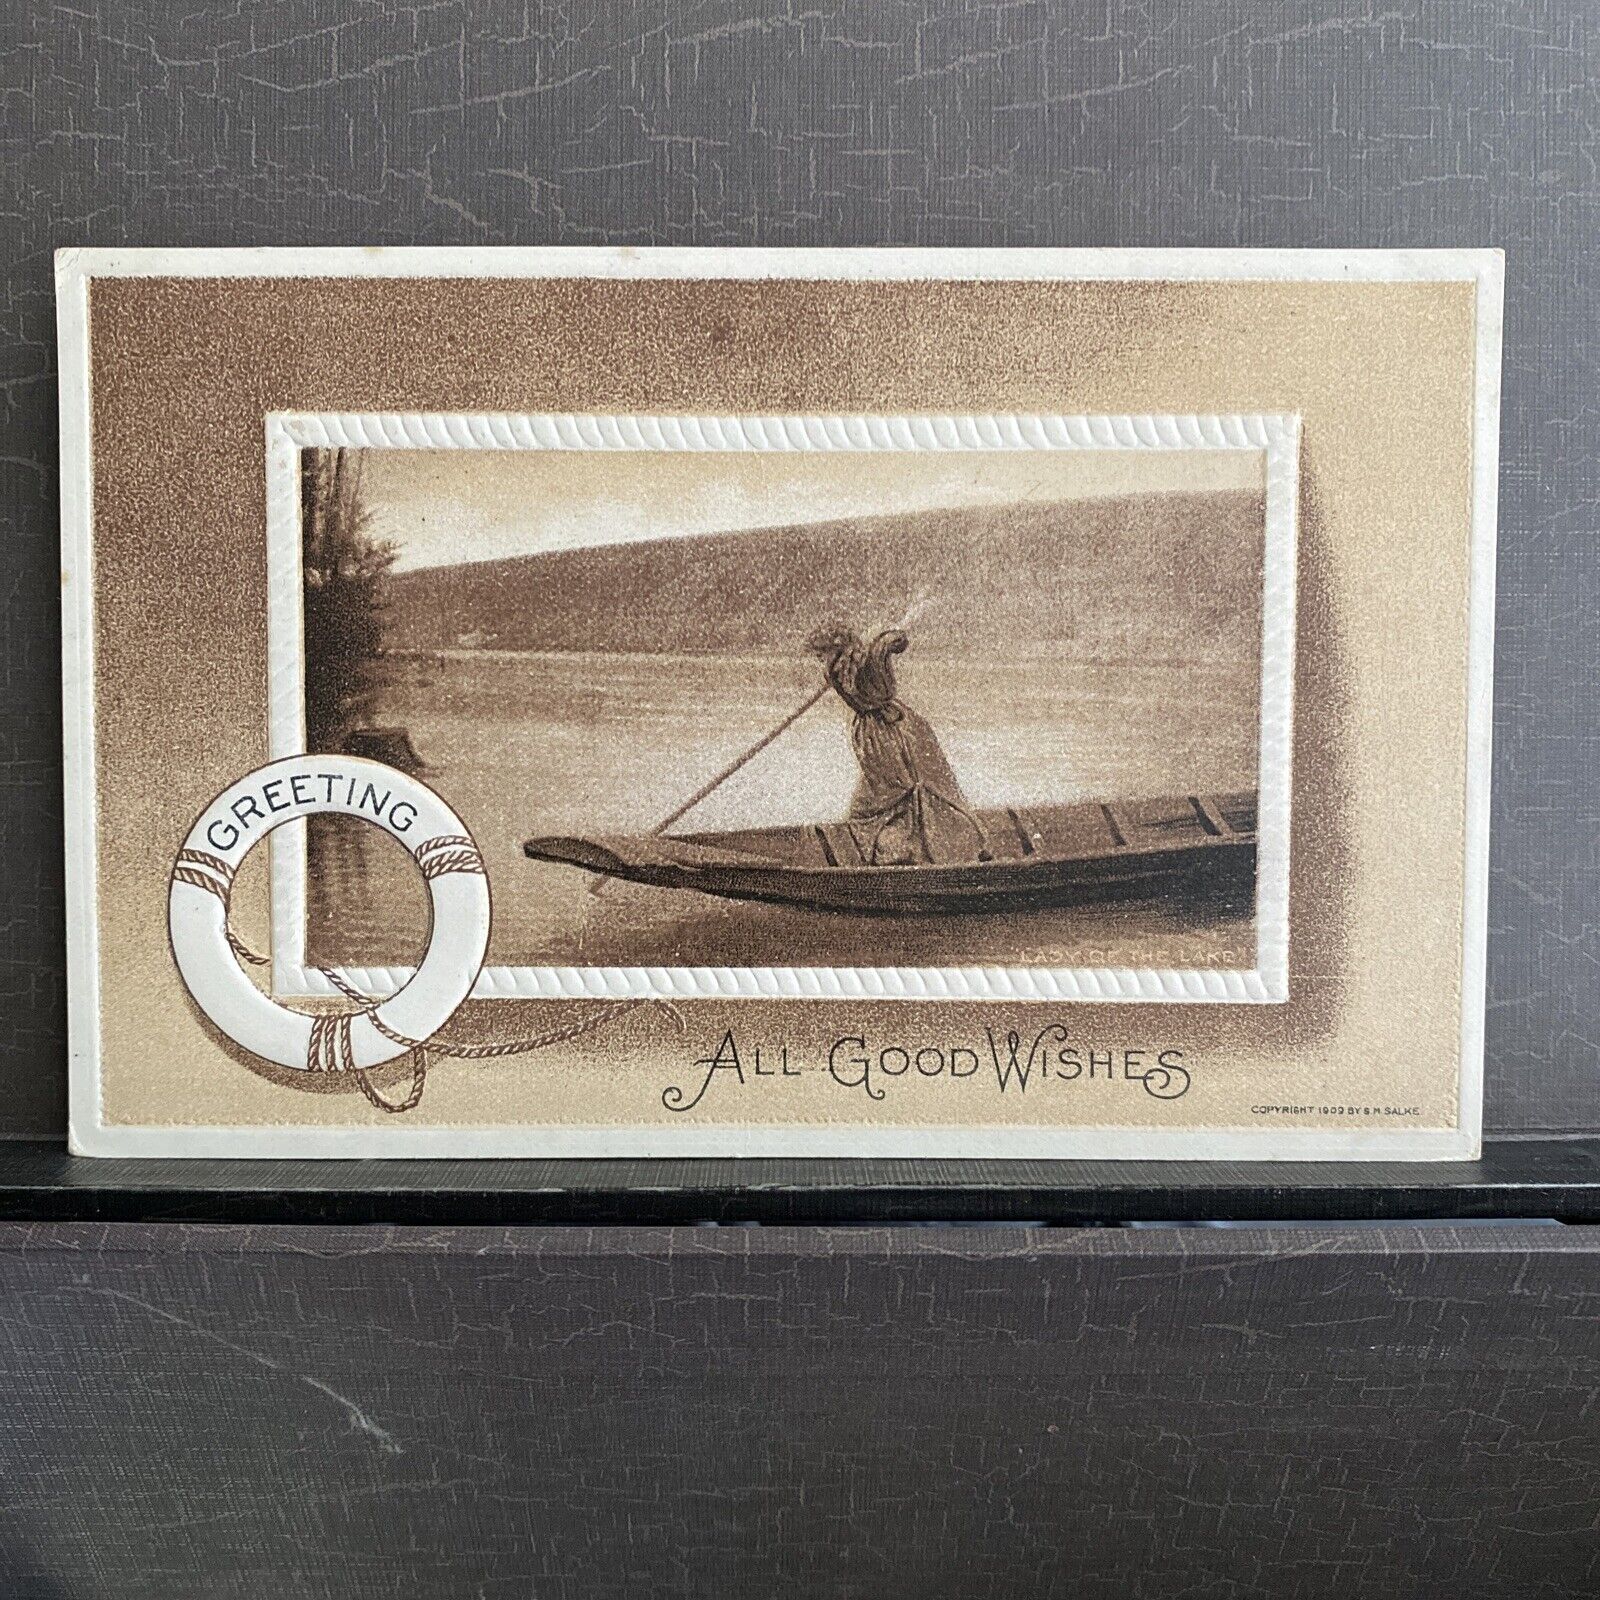 Greetings All Good Wishes Antique Postcard 1909 copyright posted Embossed